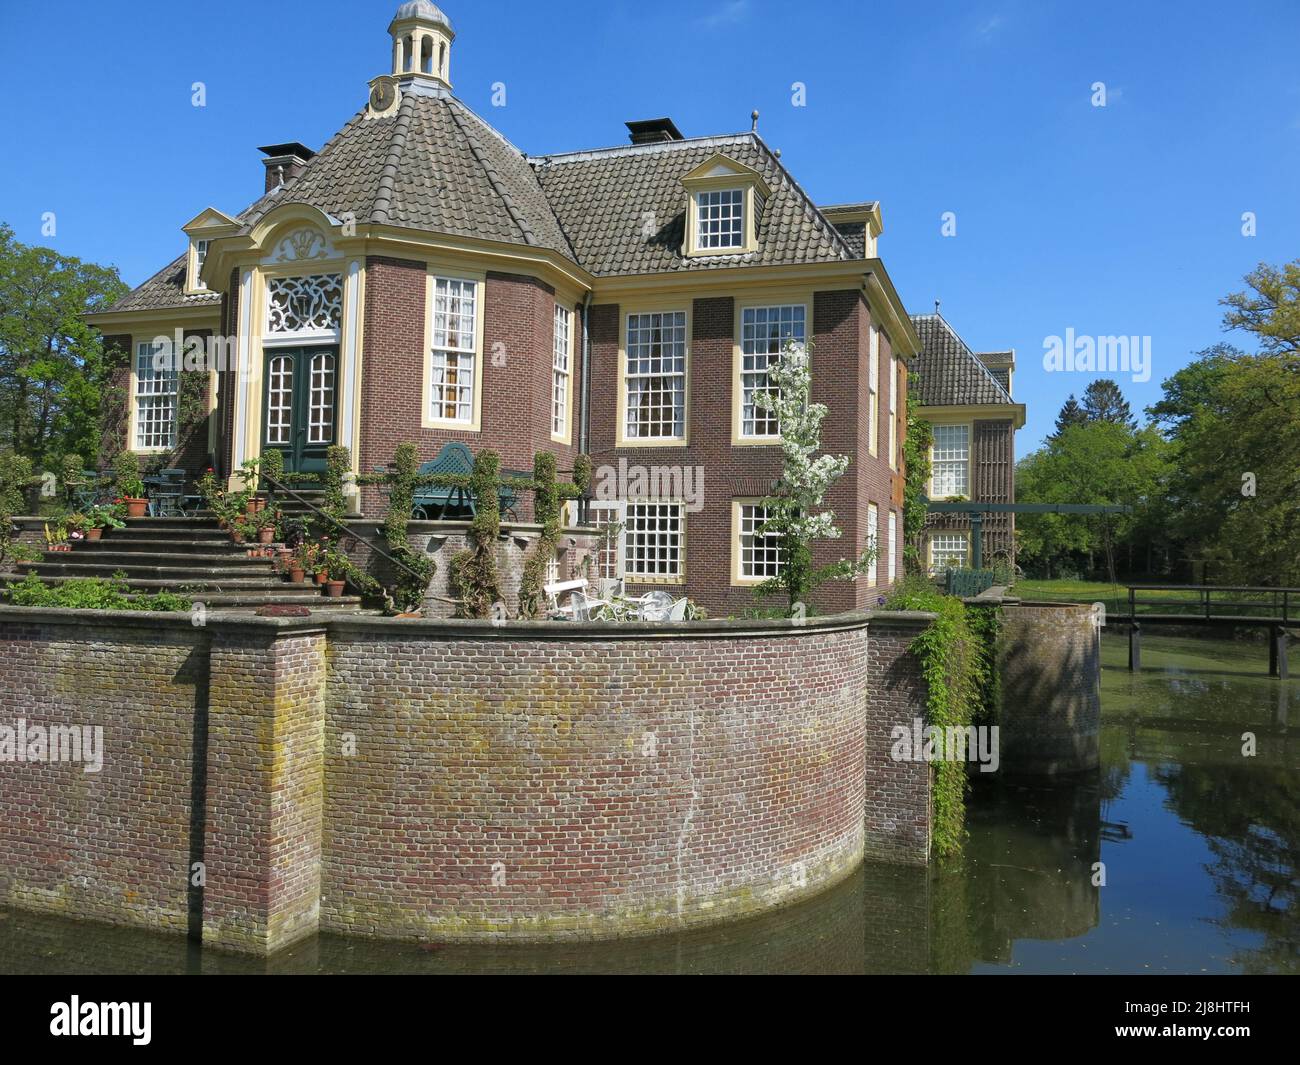 The moated manor house of De Wiersse, set within 40 acres of garden and landscaped parkland; Vorden, Gelderland, The Netherlands. Stock Photo